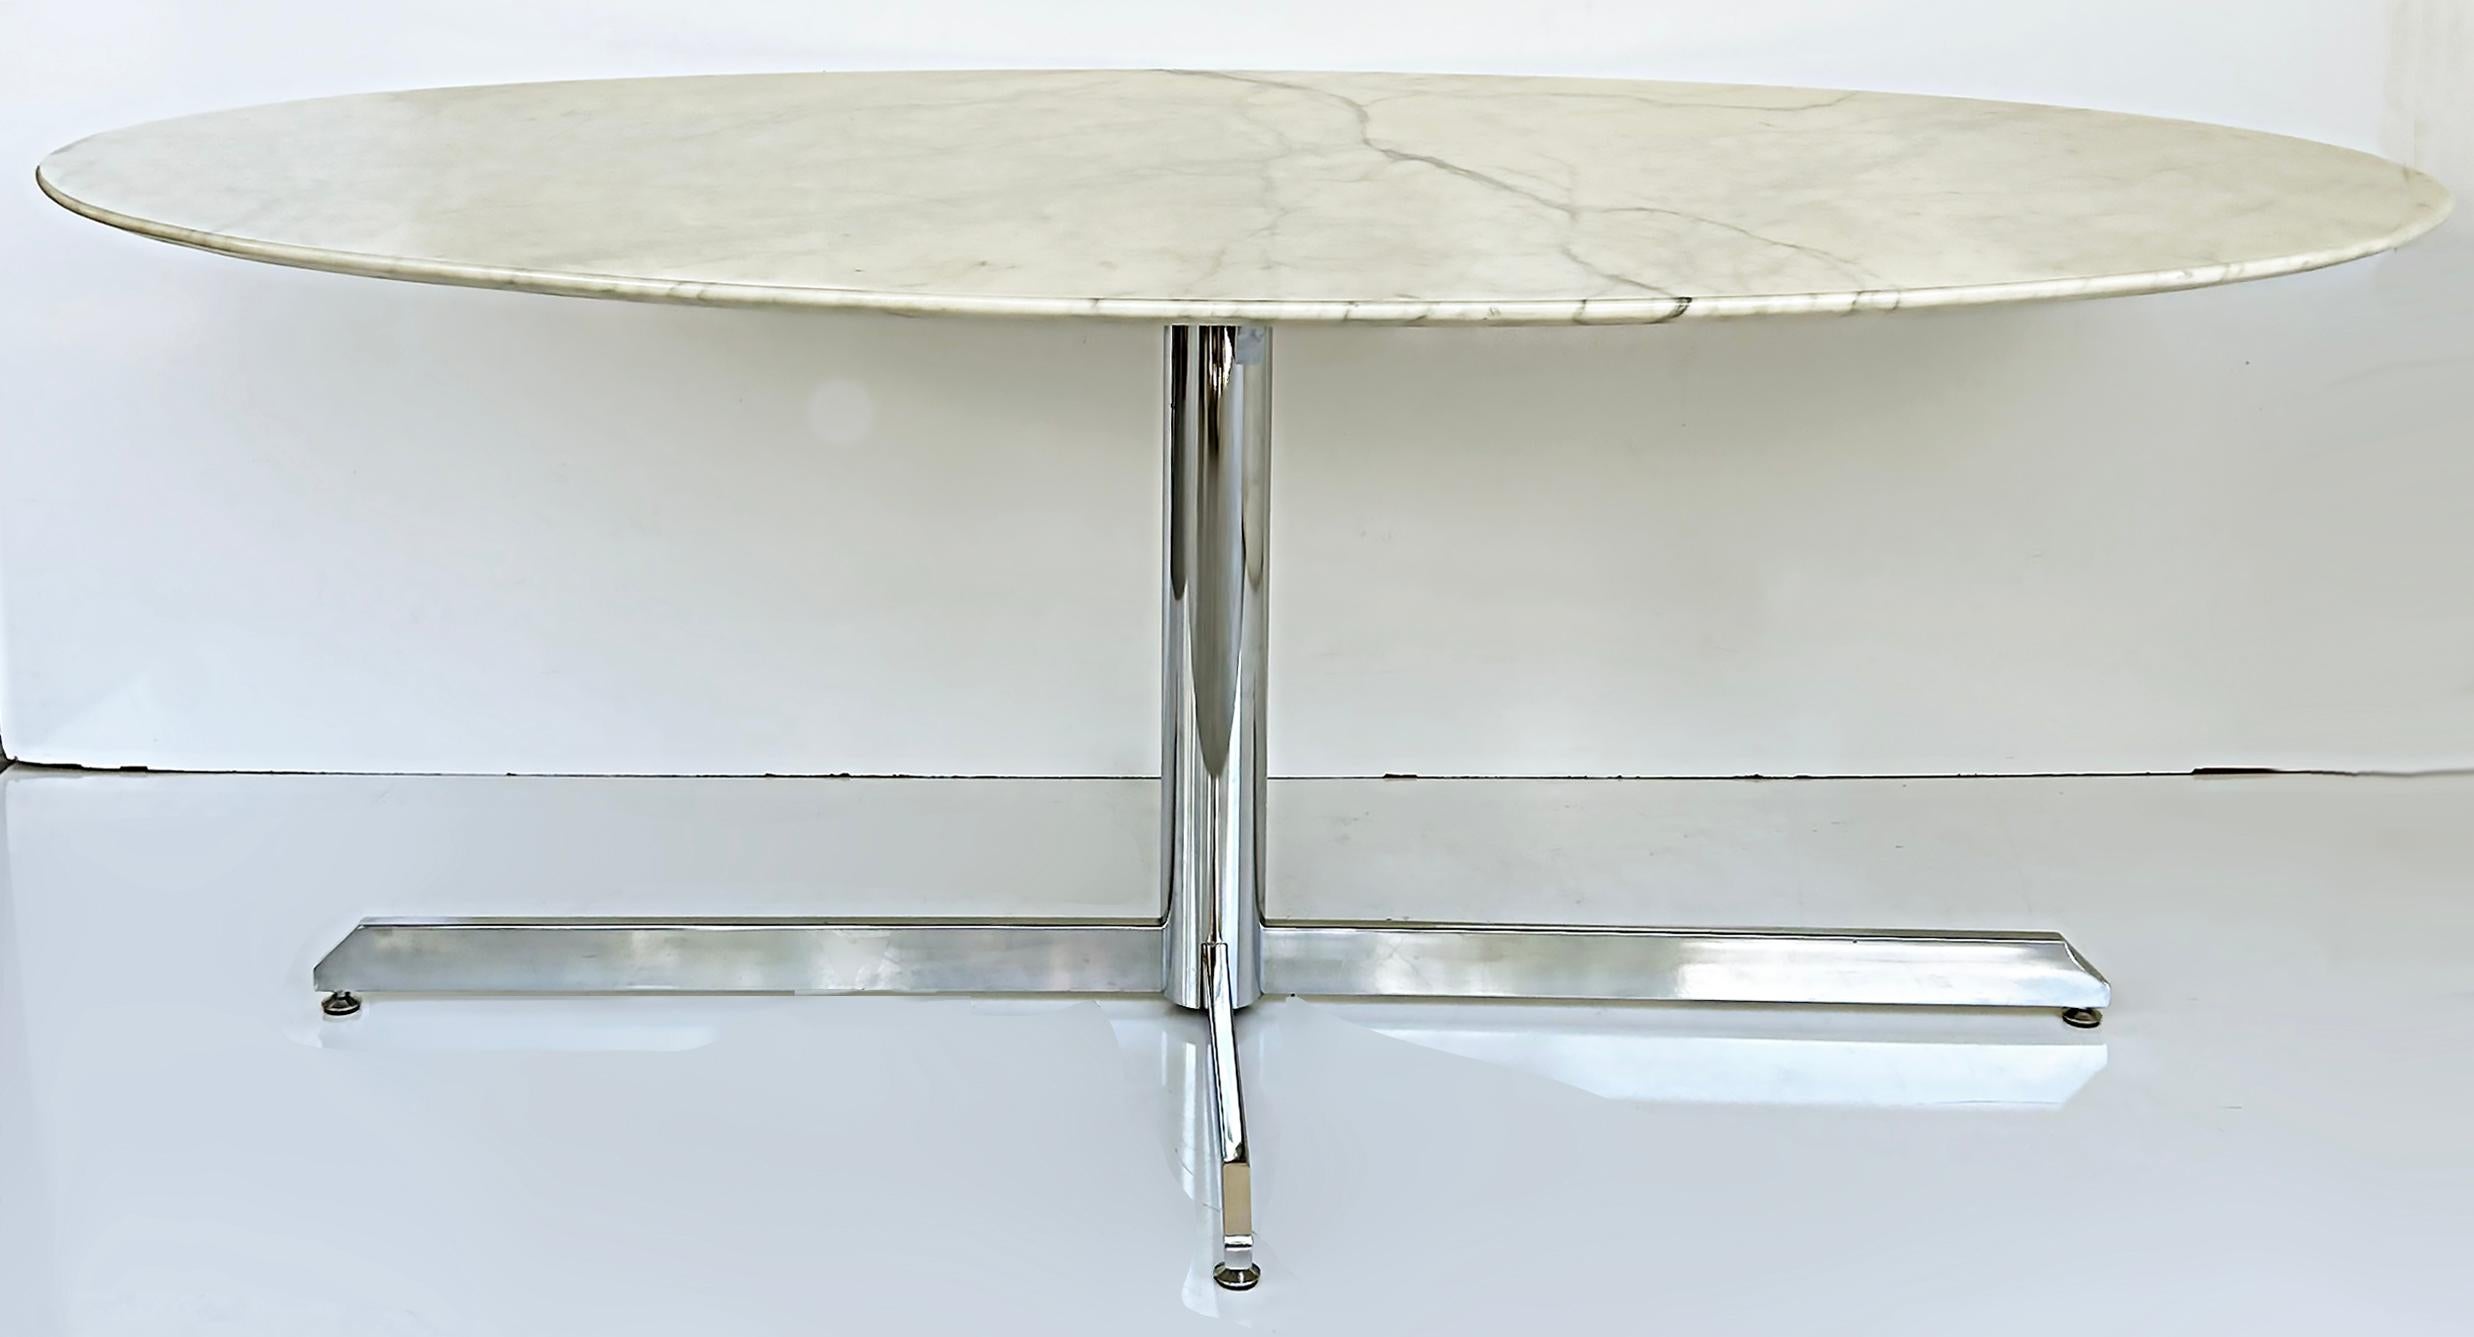 French Roche Bobois Stainless Steel Marble Dining Table, Knoll Style